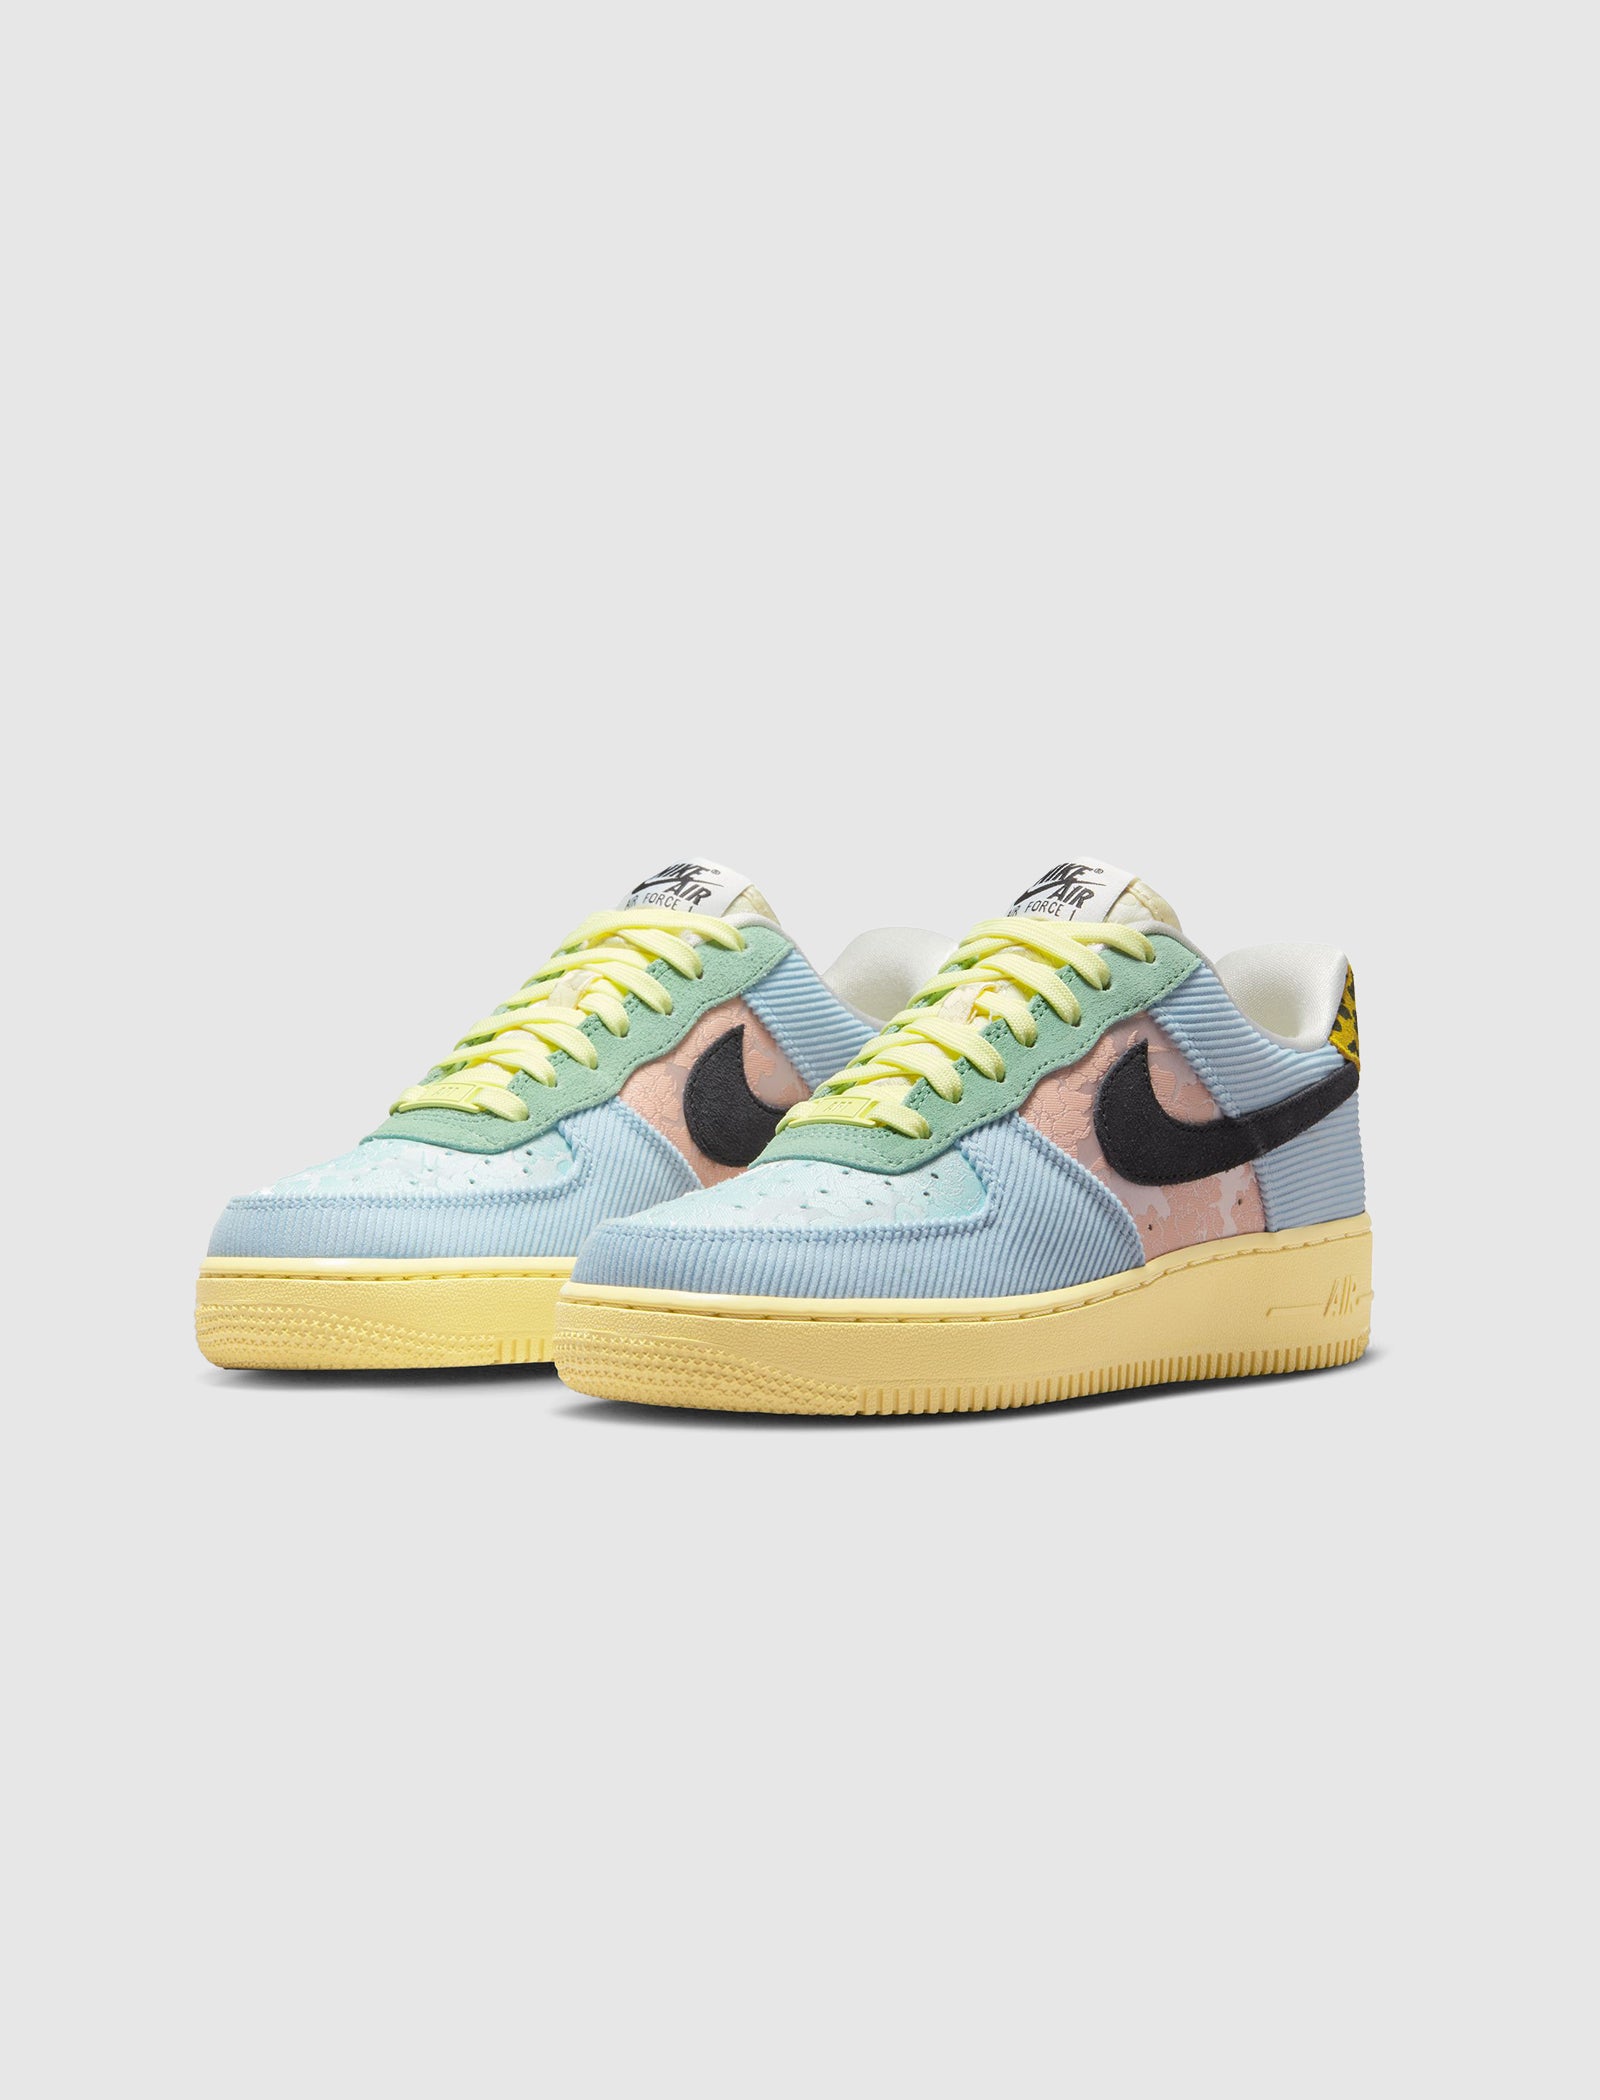 WOMEN'S AIR FORCE 1 LOW 